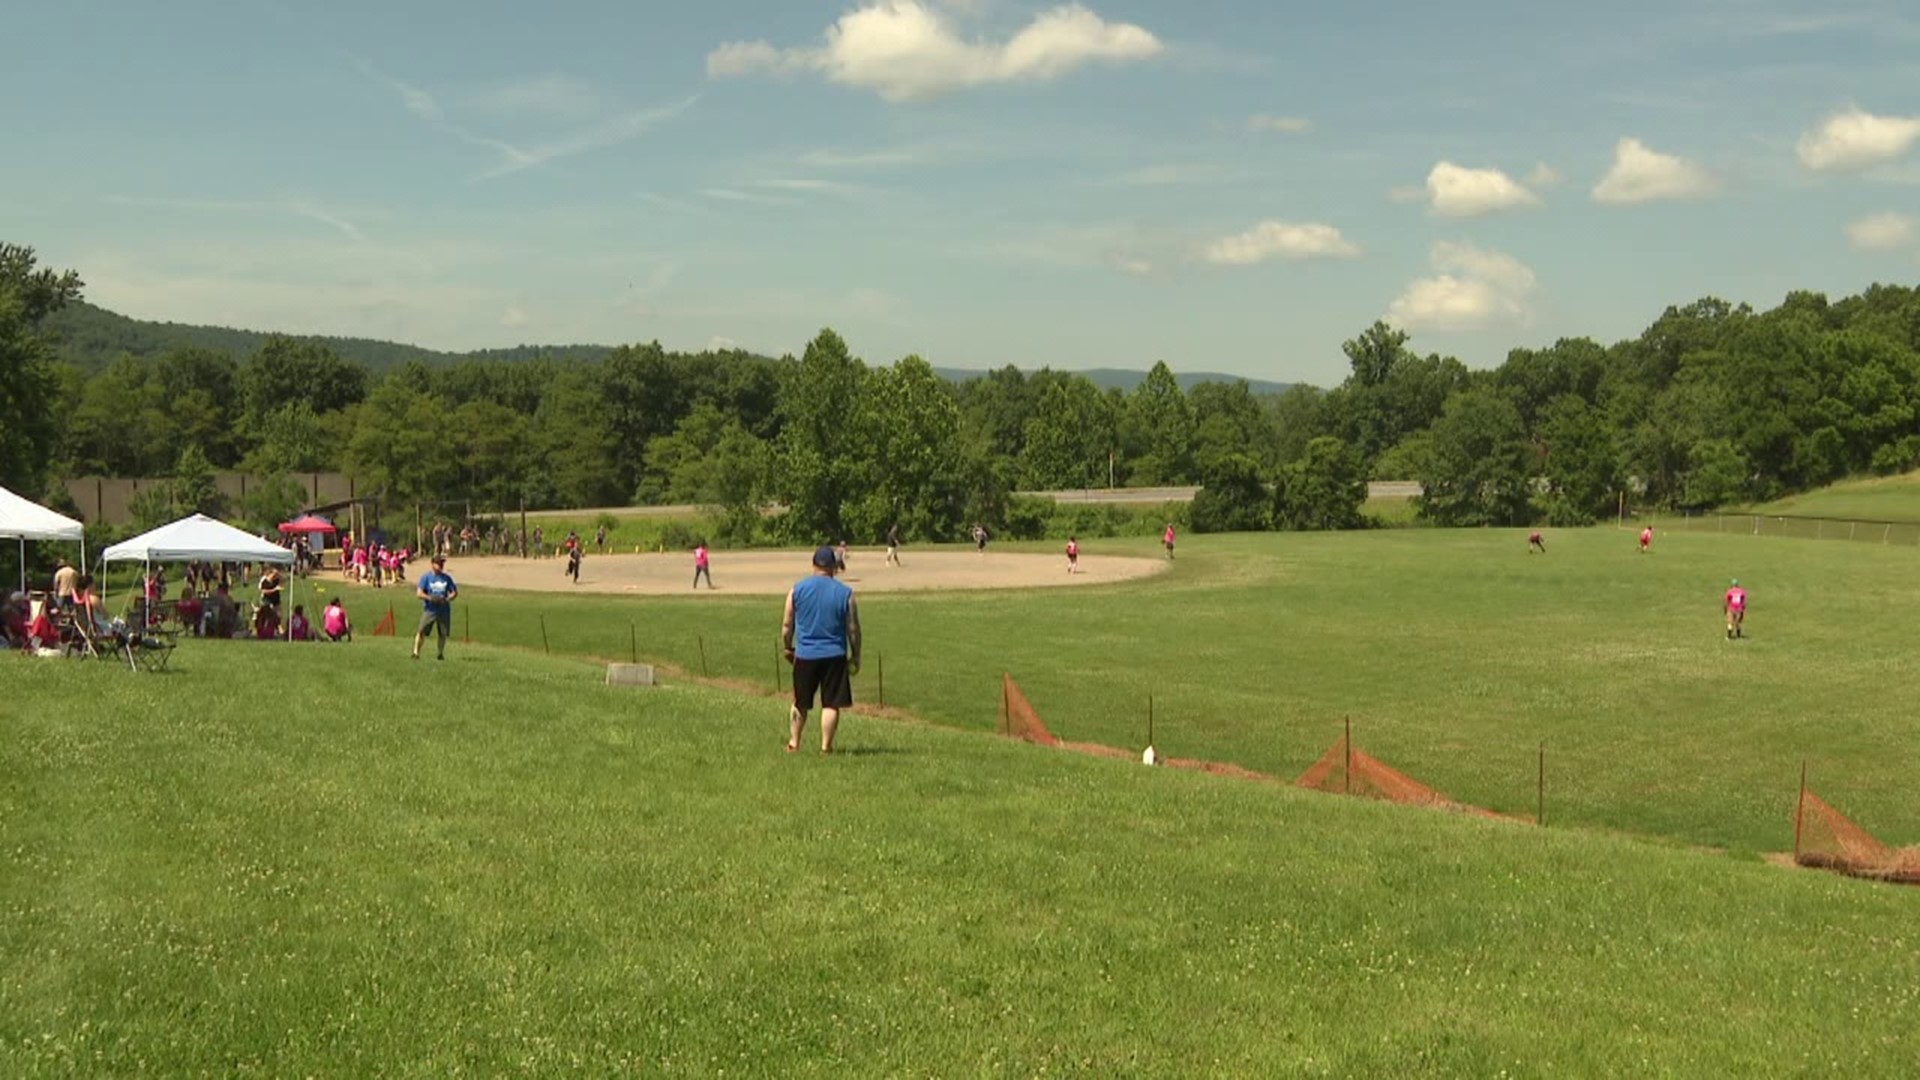 A softball tournament took place in Wyoming County on Sunday but the goal behind the competition was more than just winning.